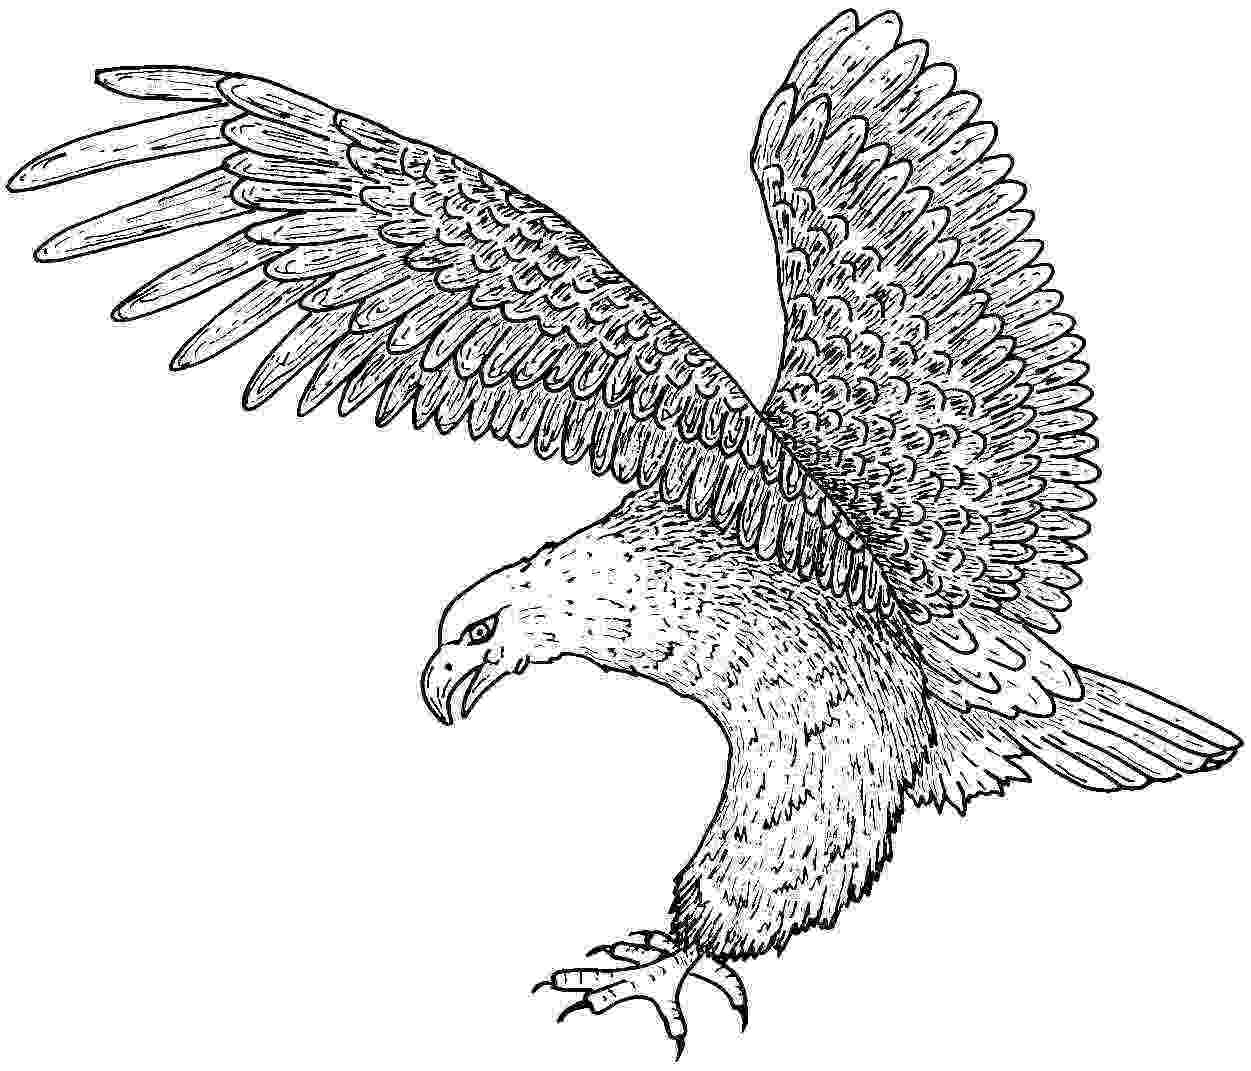 eagle colouring pictures eagle coloring pages coloring pages to download and print eagle colouring pictures 